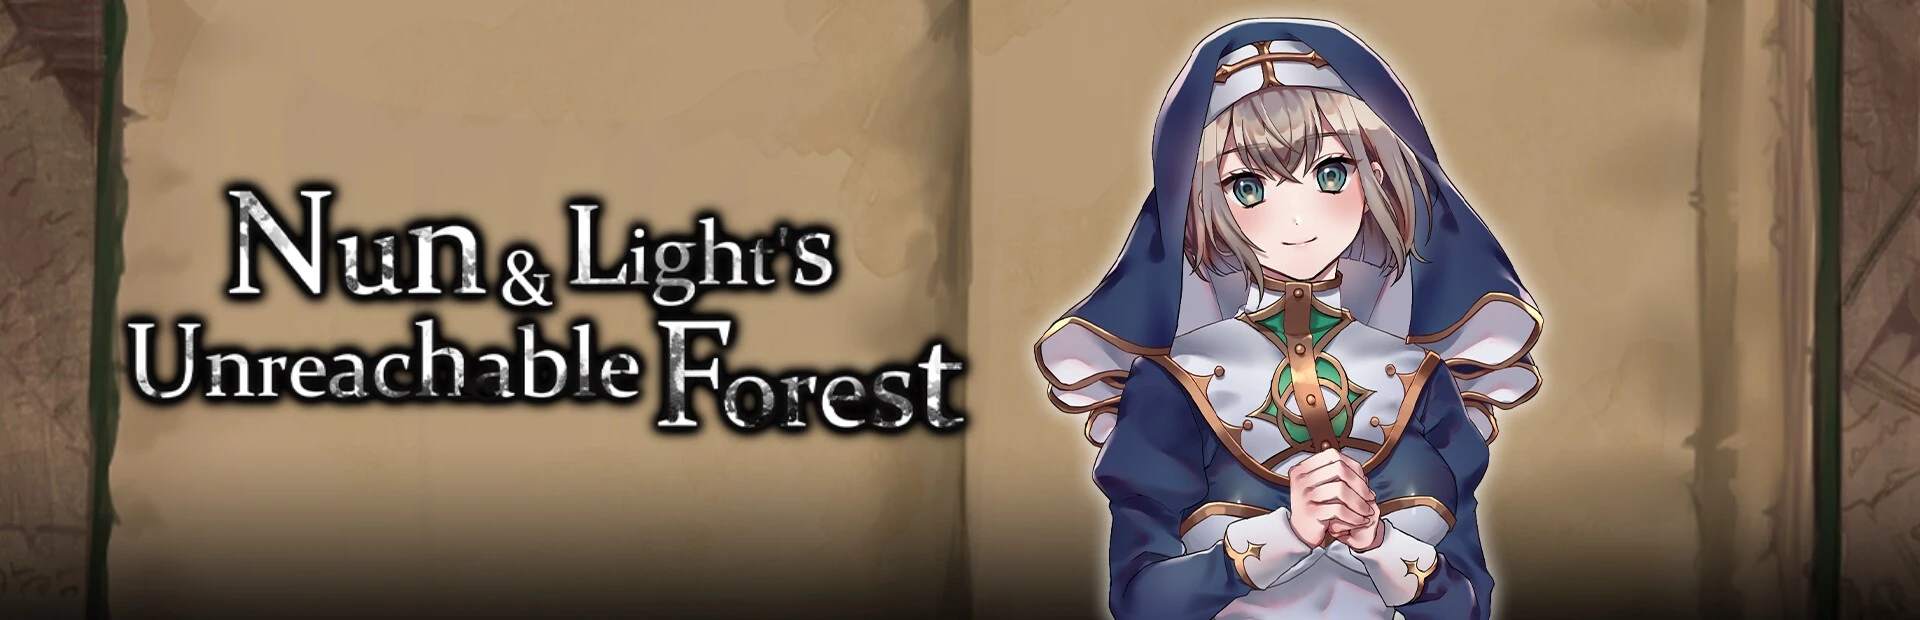 Nun and Light's Unreachable Forest main image